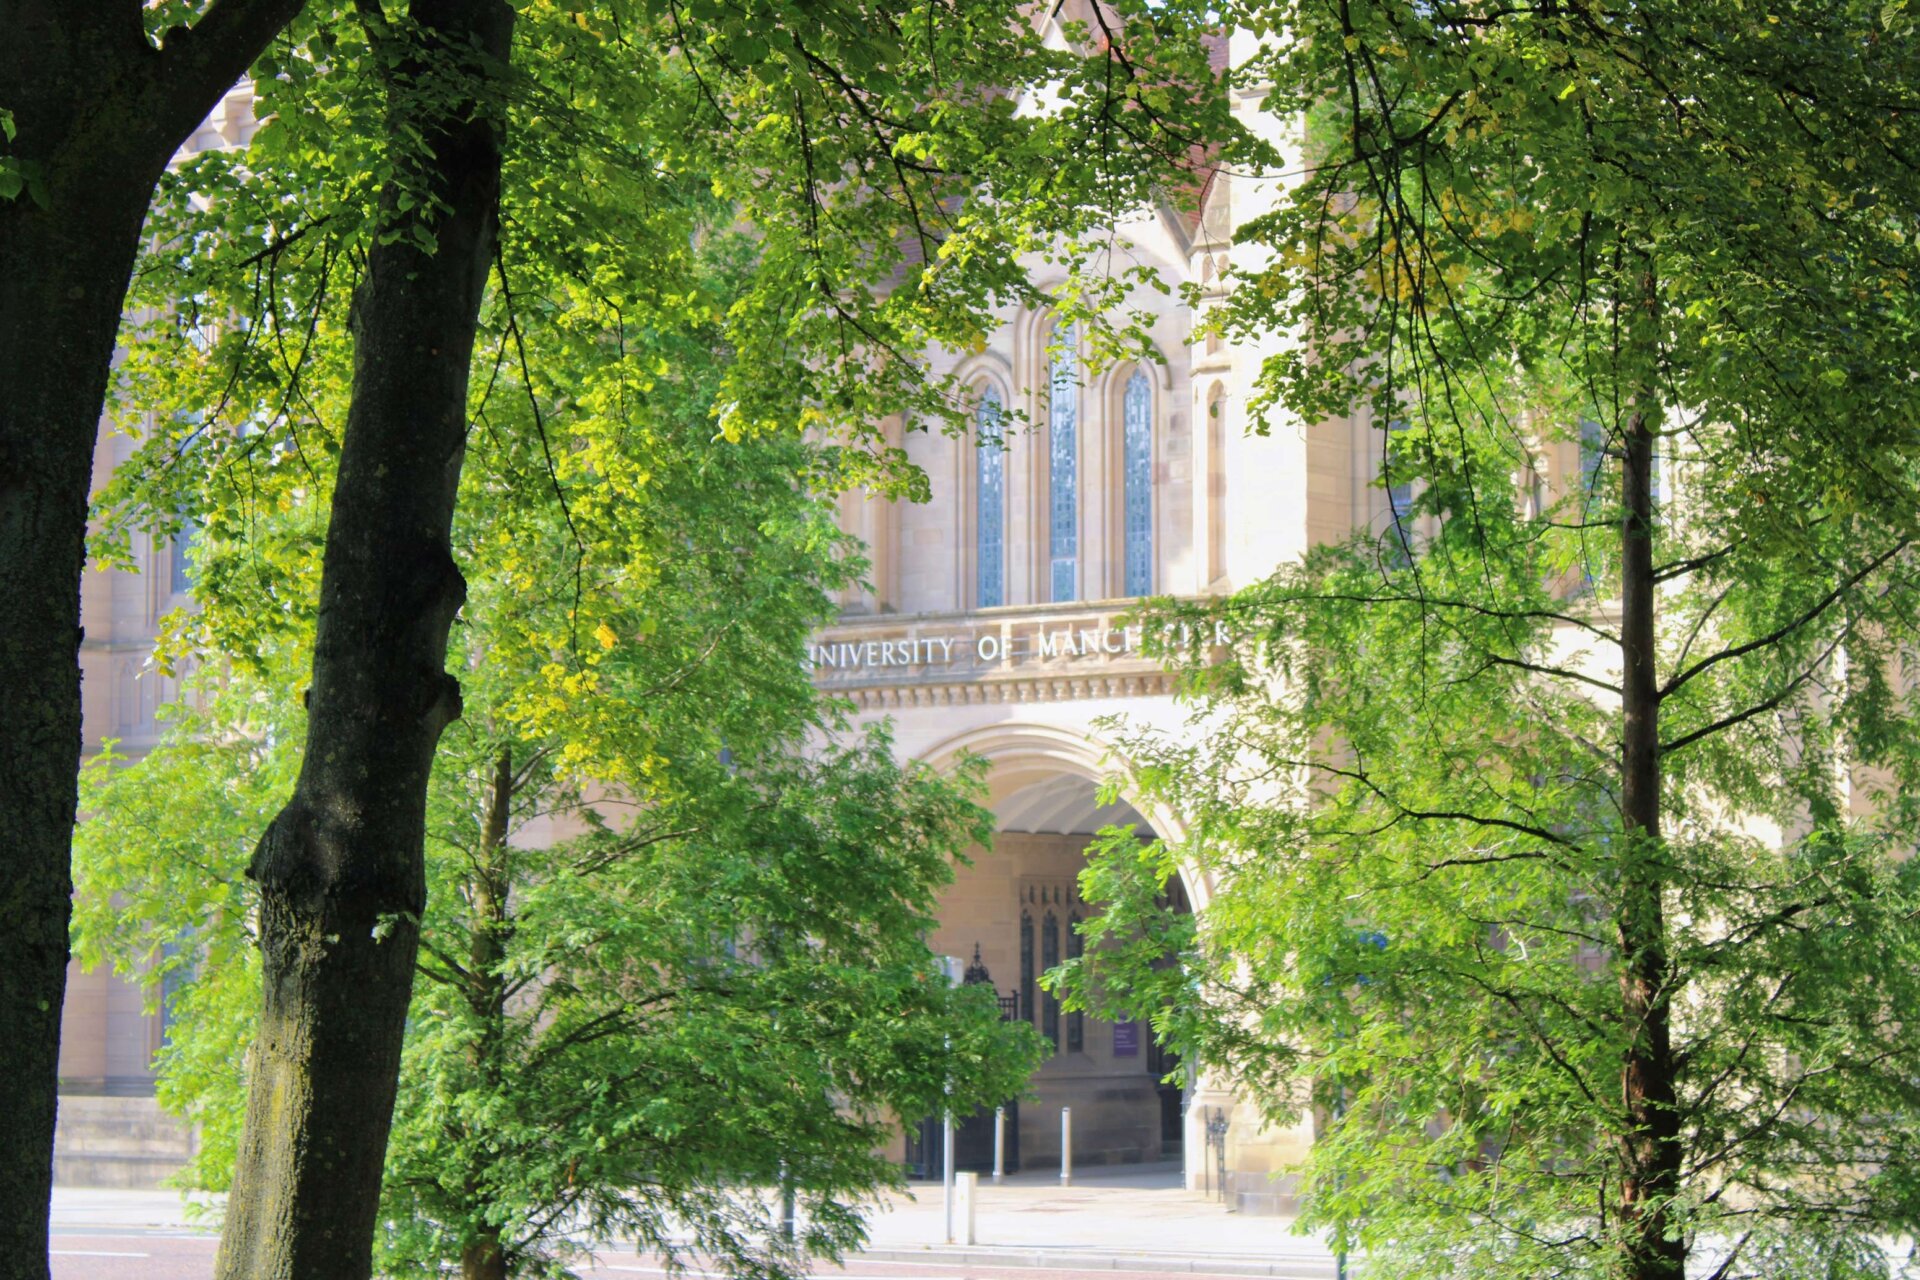 a view of the iconic University of Manchester through the trees